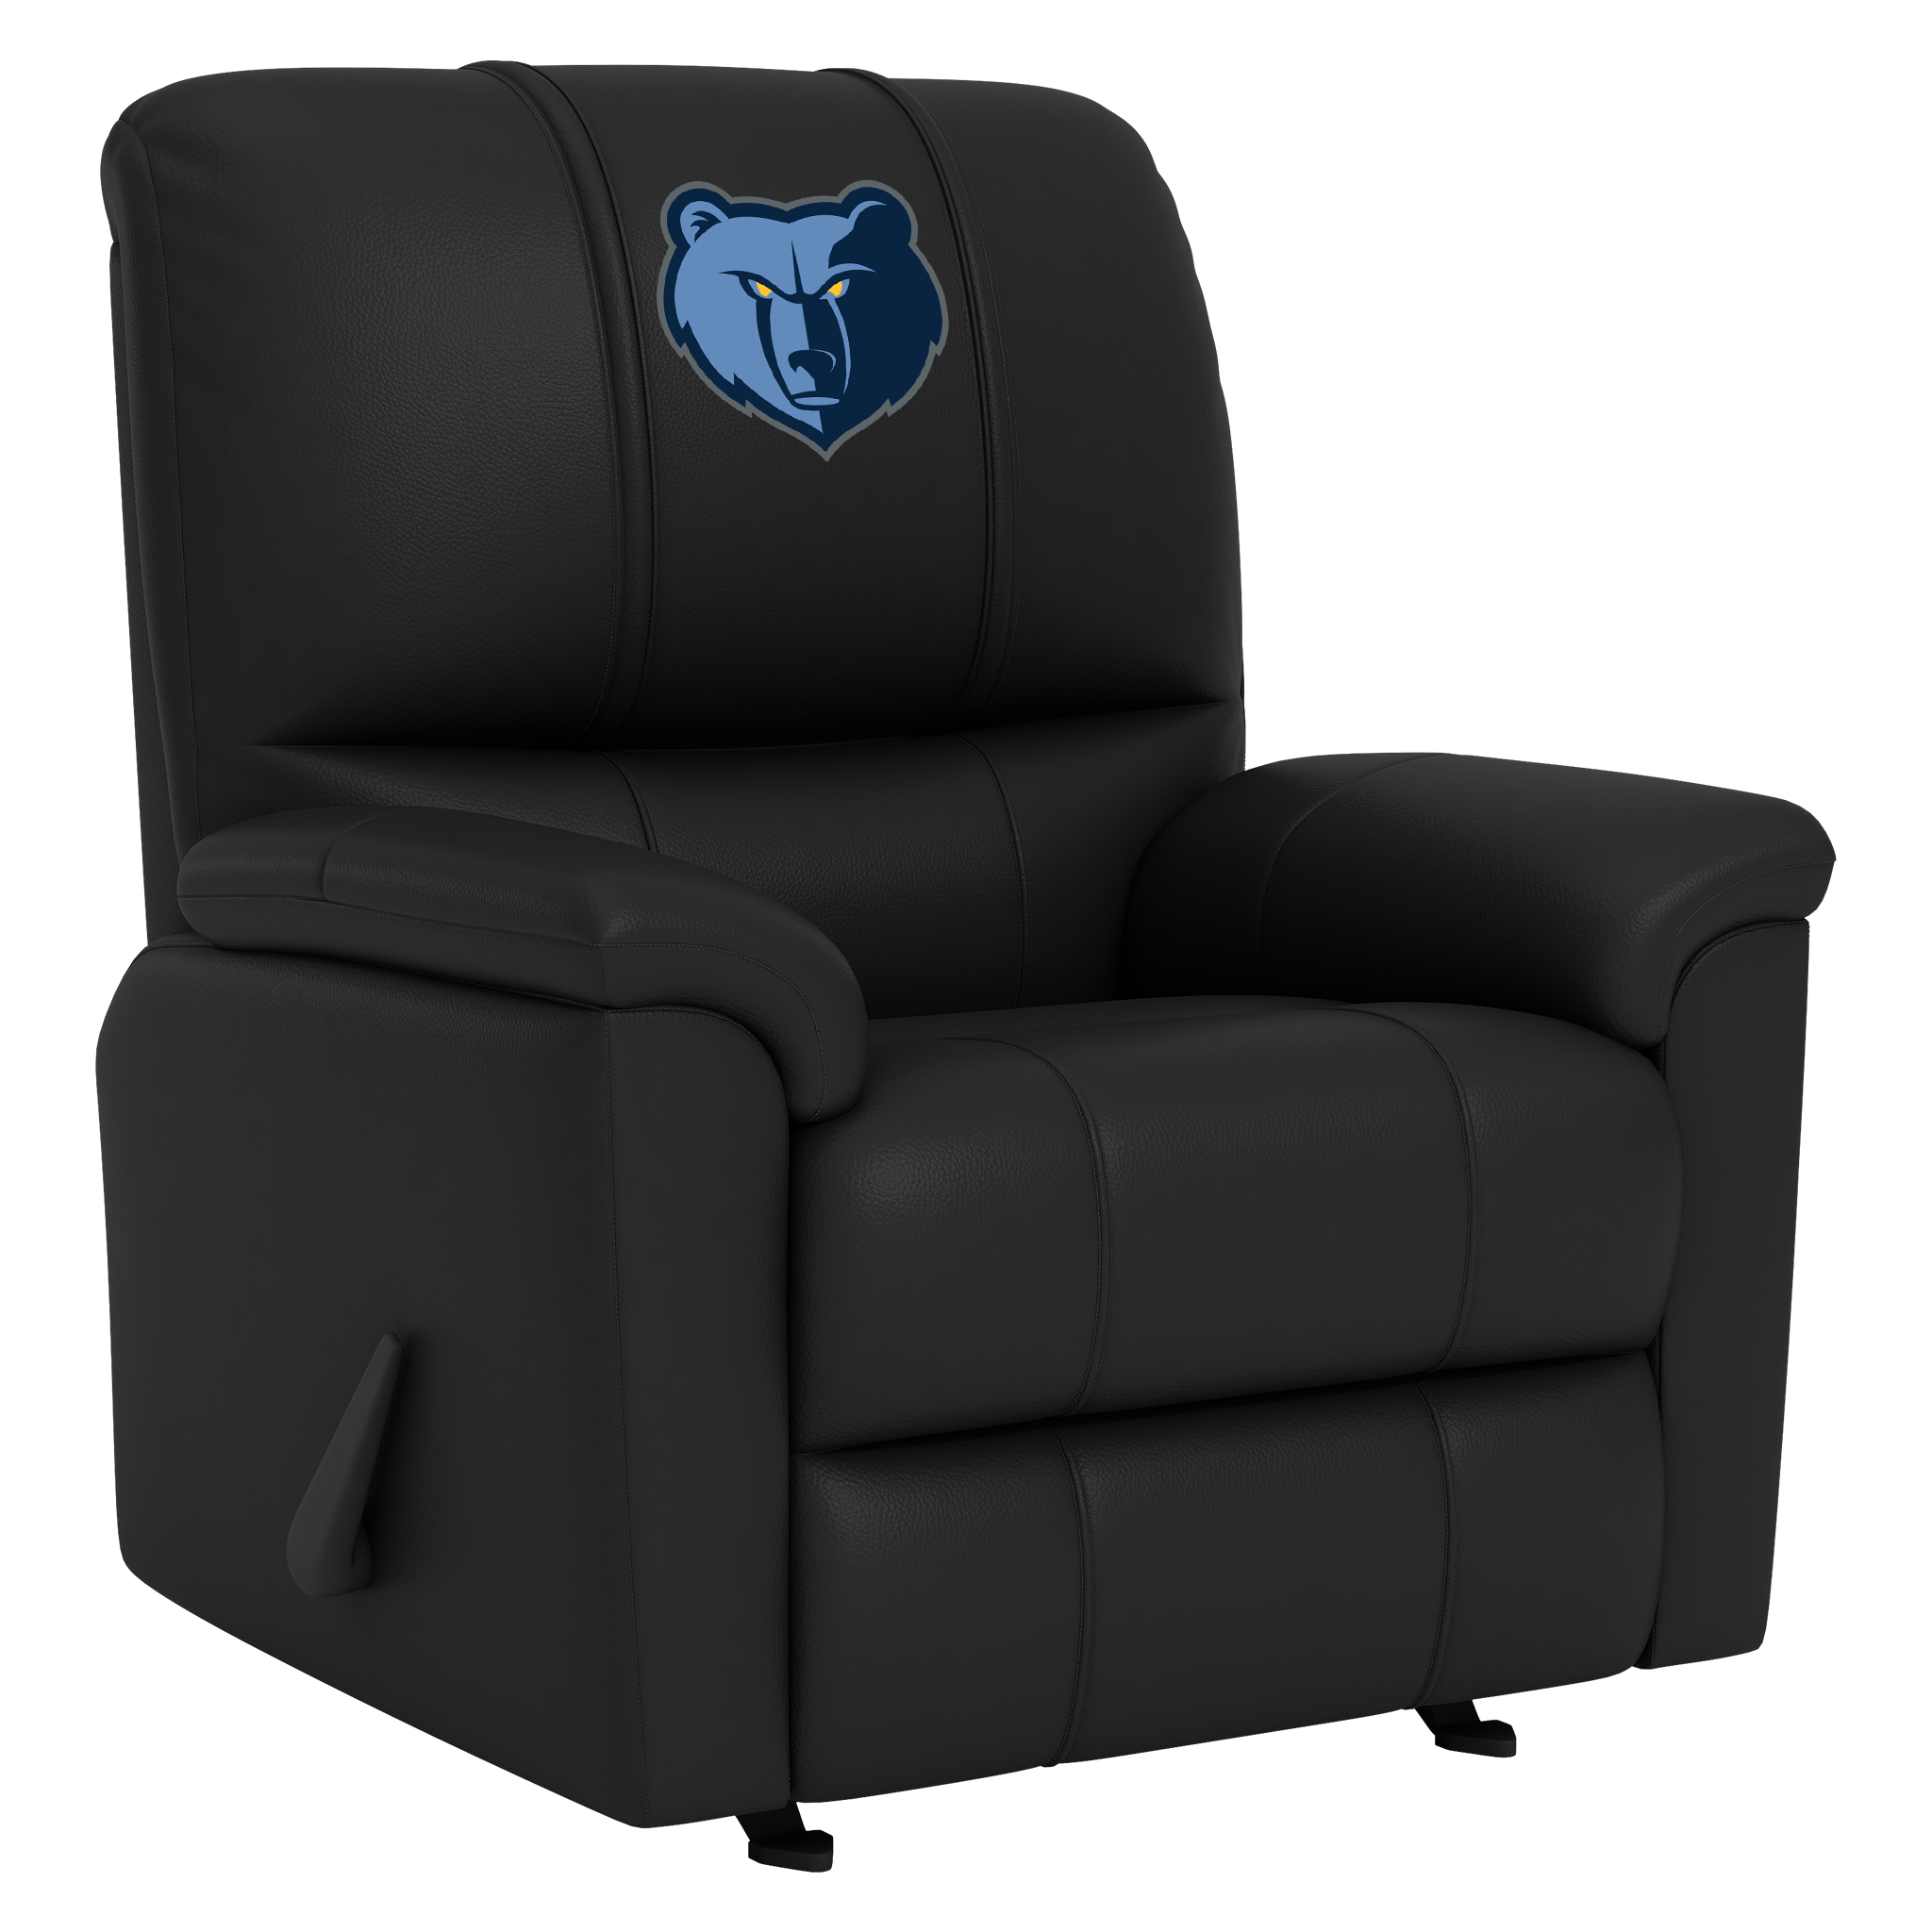 Golden State Warriors Silver Club Chair with Golden State Warriors 2018 Champions Logo Panel